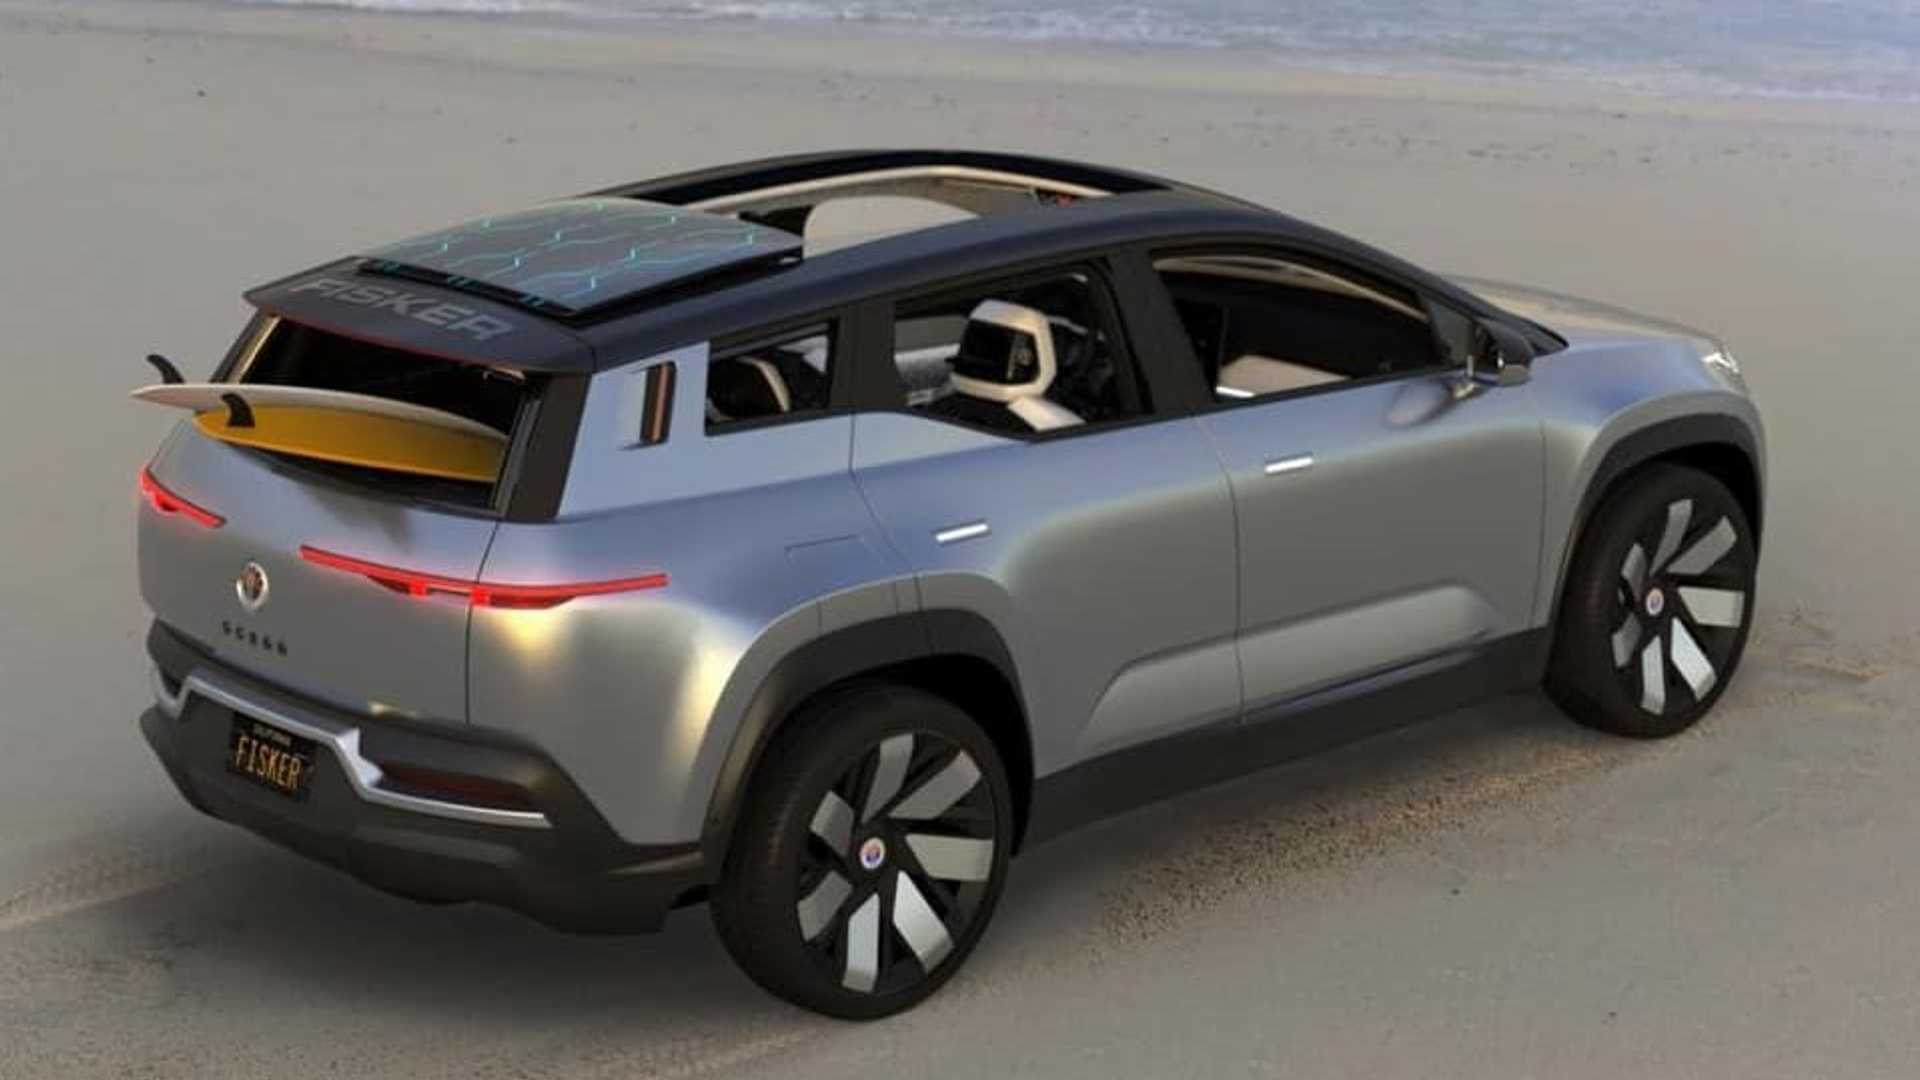 Fisker Ocean Electric Suv Dubbed World S Most Sustainable Vehicle